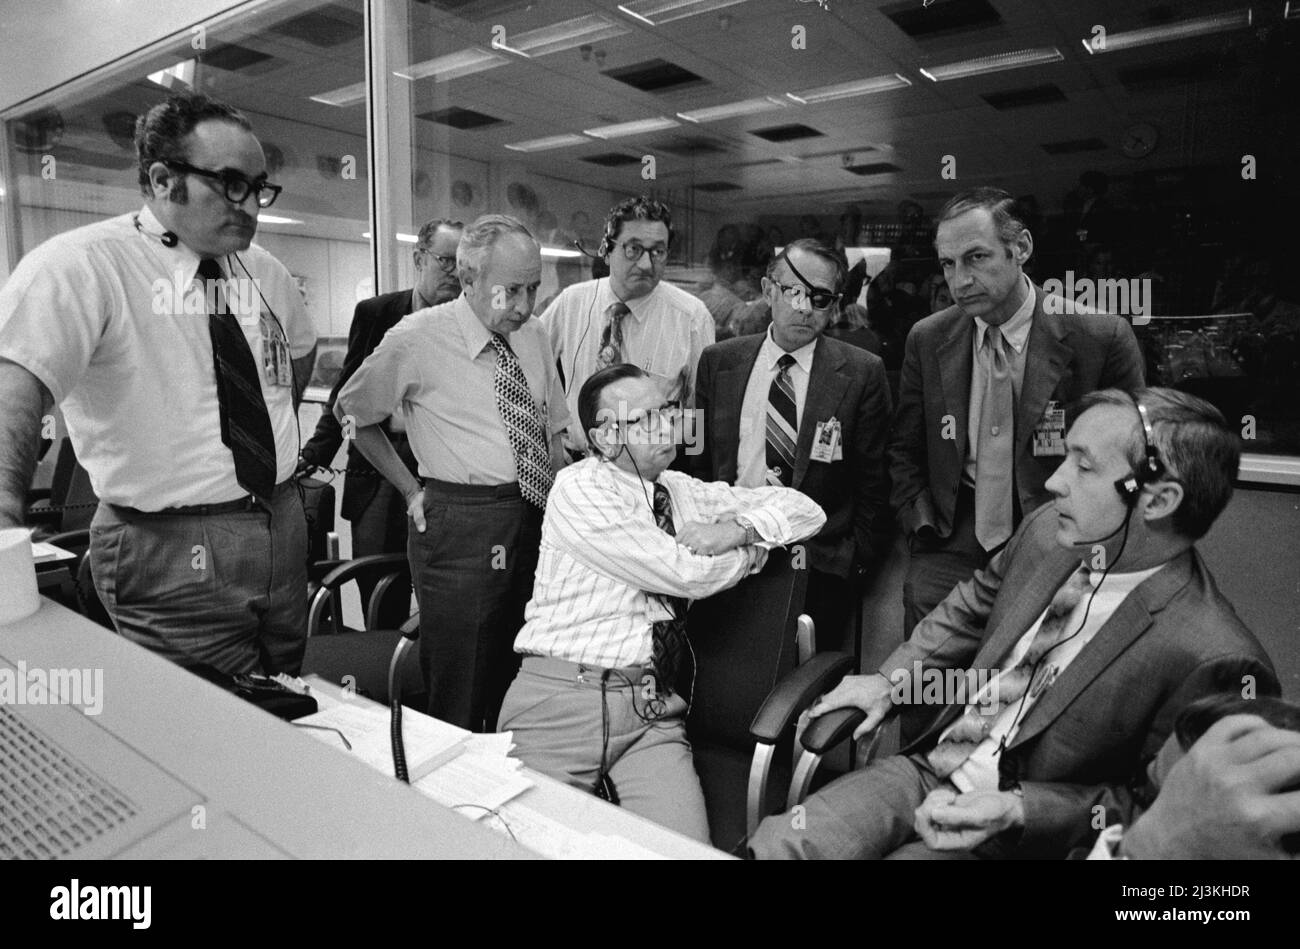 NASA officials gather around a console in the Mission Operations Control Room (MOCR) in the Mission Control Center (MCC) prior to the making of a decision whether to land Apollo 16 on the moon or to abort the landing. Seated, left to right, are Dr. Christopher C. Kraft Jr., Director of the Manned Spacecraft Center (MSC), and Brig. Gen. James A. McDivitt (USAF), Manager, Apollo Spacecraft Program Office, MSC; and standing, left to right, are Dr. Rocco A. Petrone, Apollo Program Director, Office Manned Space Flight (OMSF), NASA HQ.; Capt. John K. Holcomb (U.S. Navy, Ret.), Director of Apollo Ope Stock Photo